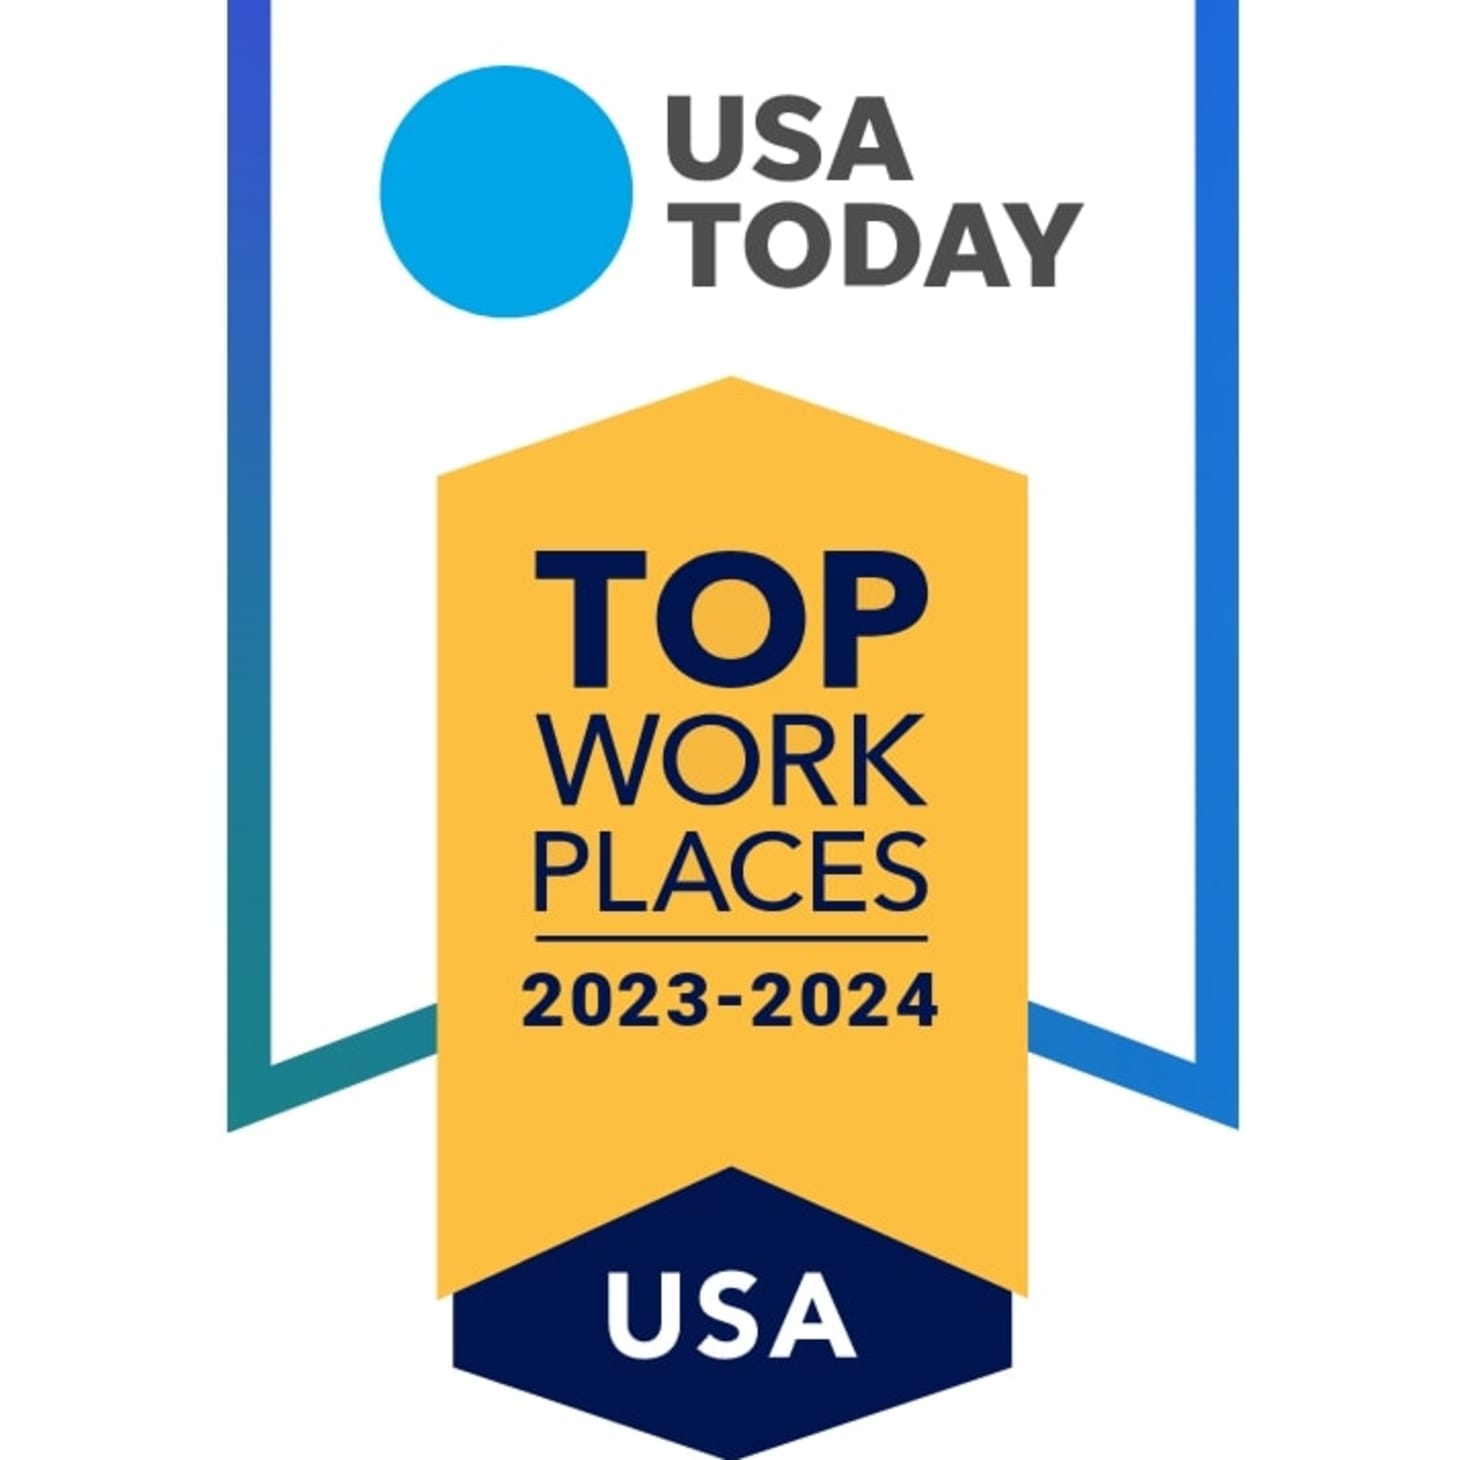 NAVEX Honored by USA Today as a 2024 USA Top Workplace